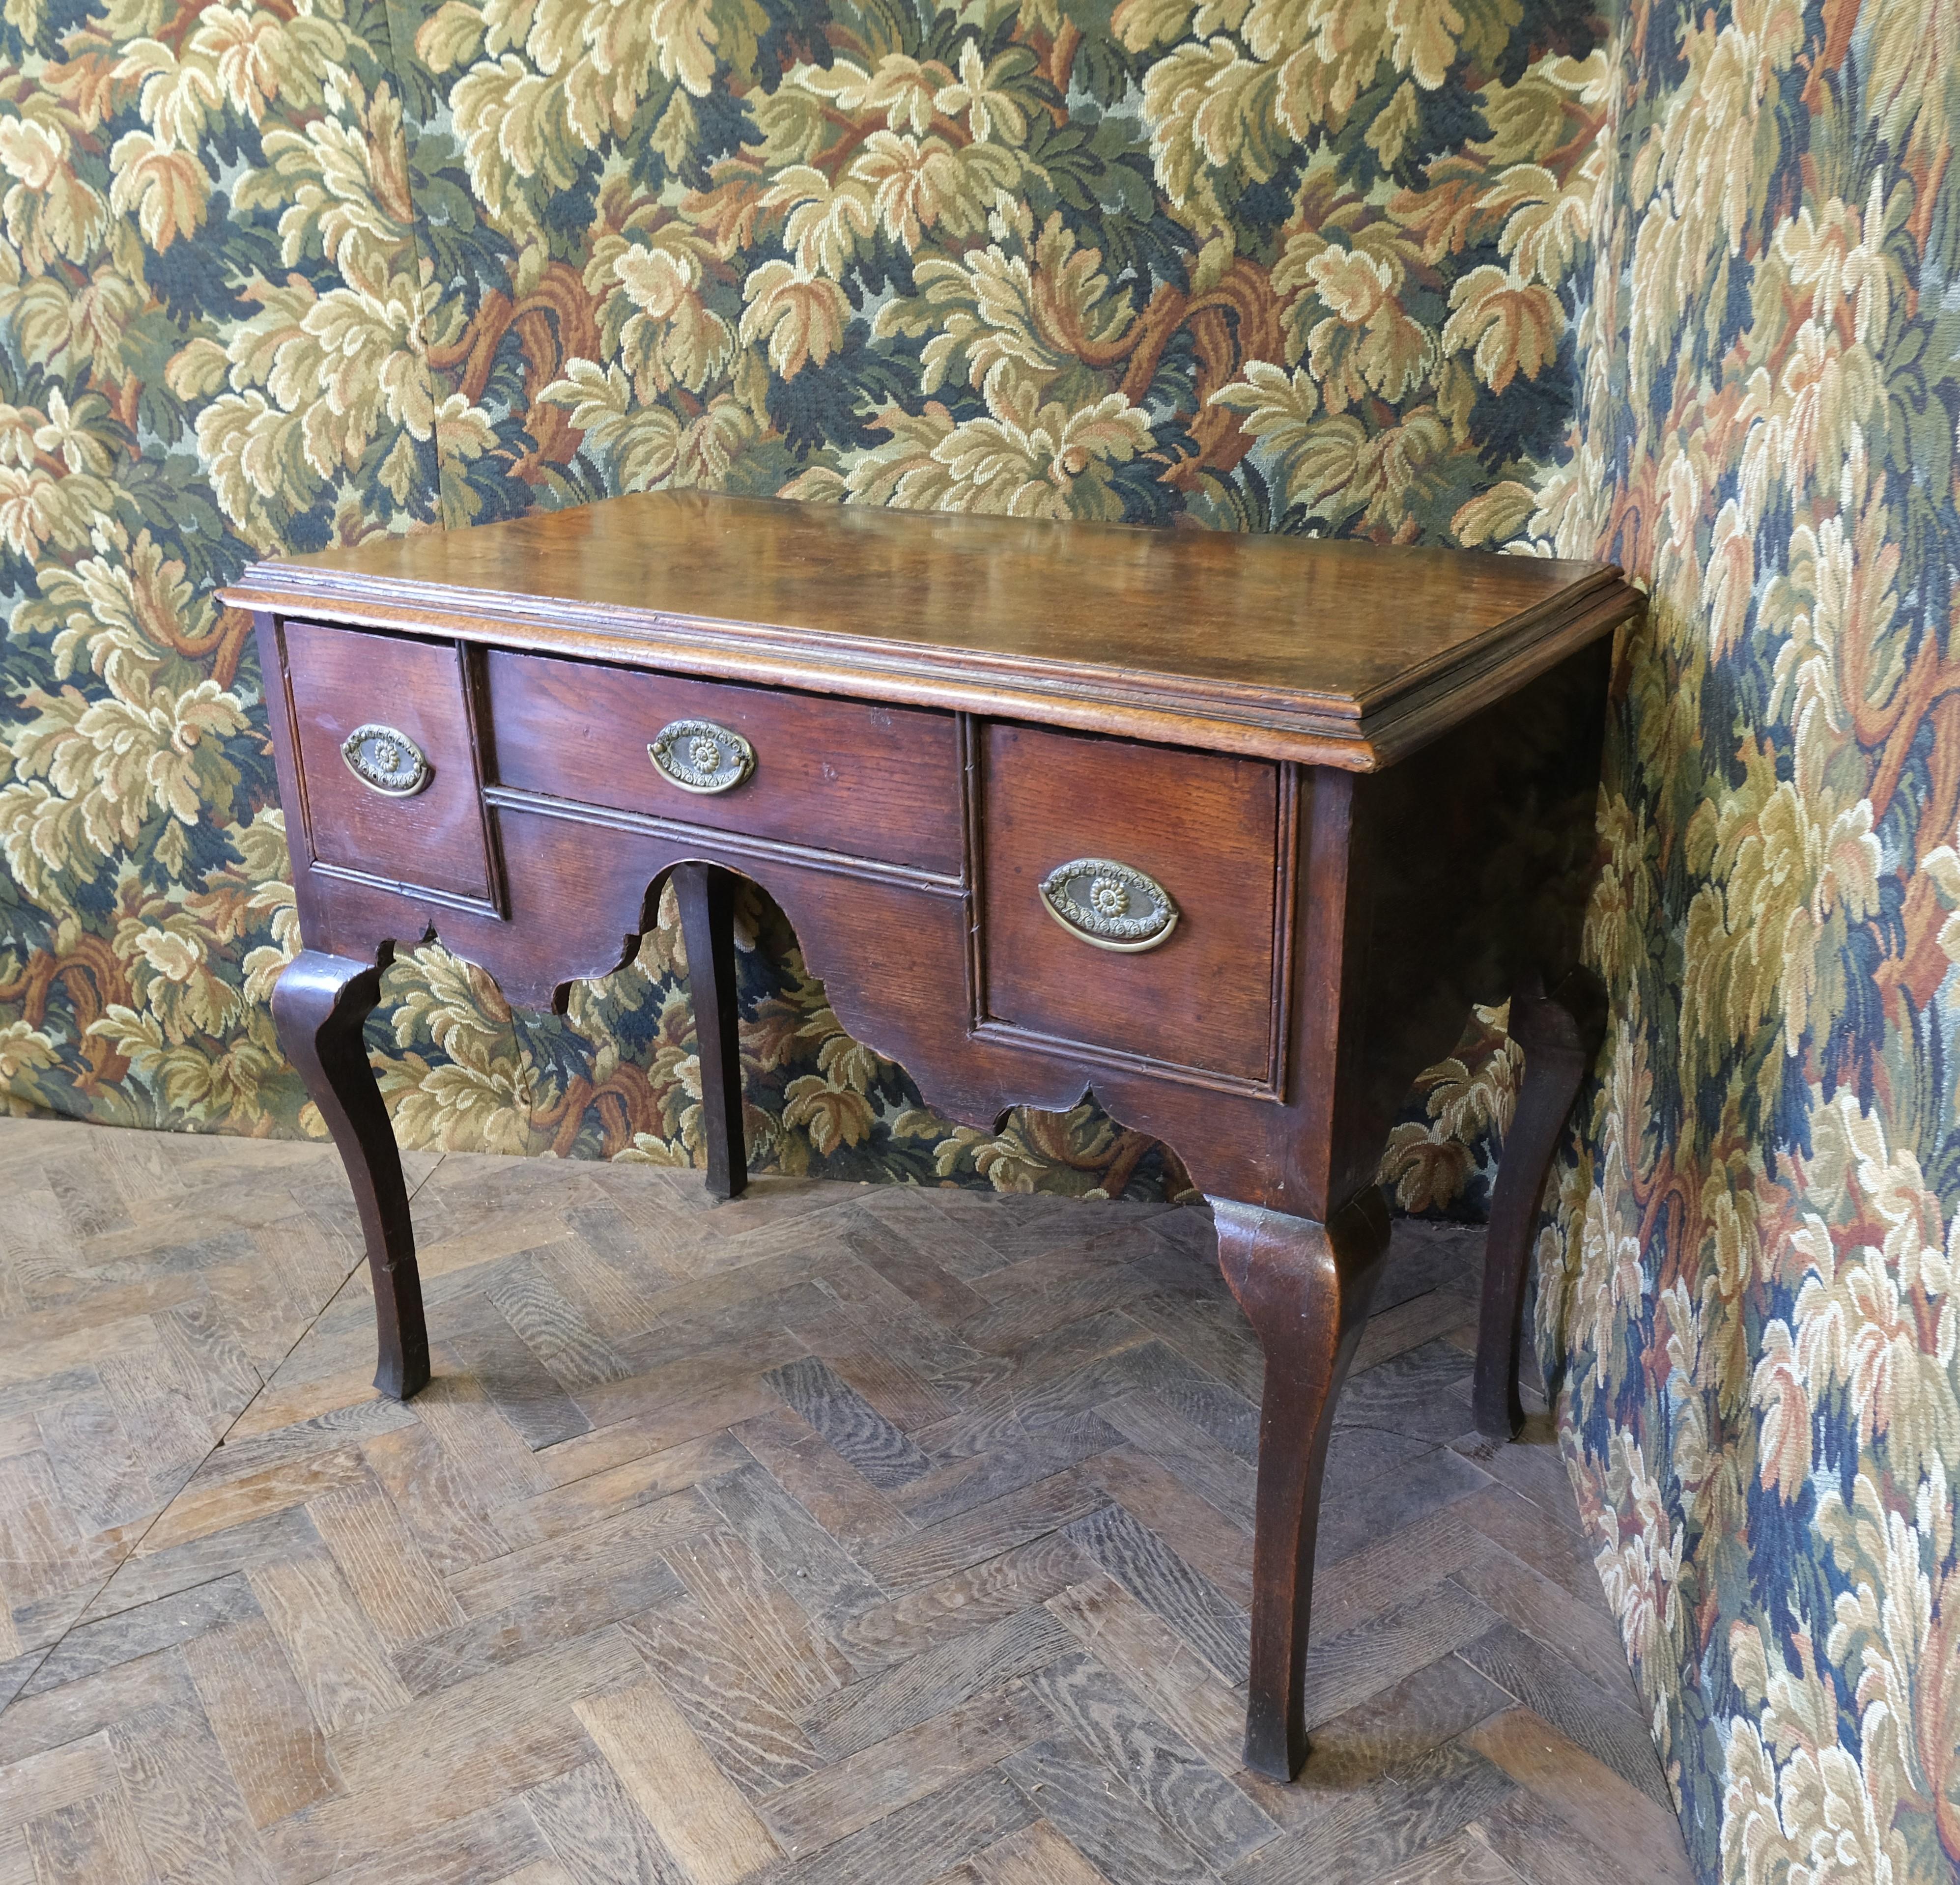 Hutton-Clarke Antiques proudly presents an exquisite mid-18th century Georgian oak lowboy. This distinguished piece showcases elegant square cabriole legs and is equipped with three drawers, complemented by a gracefully shaped apron. Its remarkable